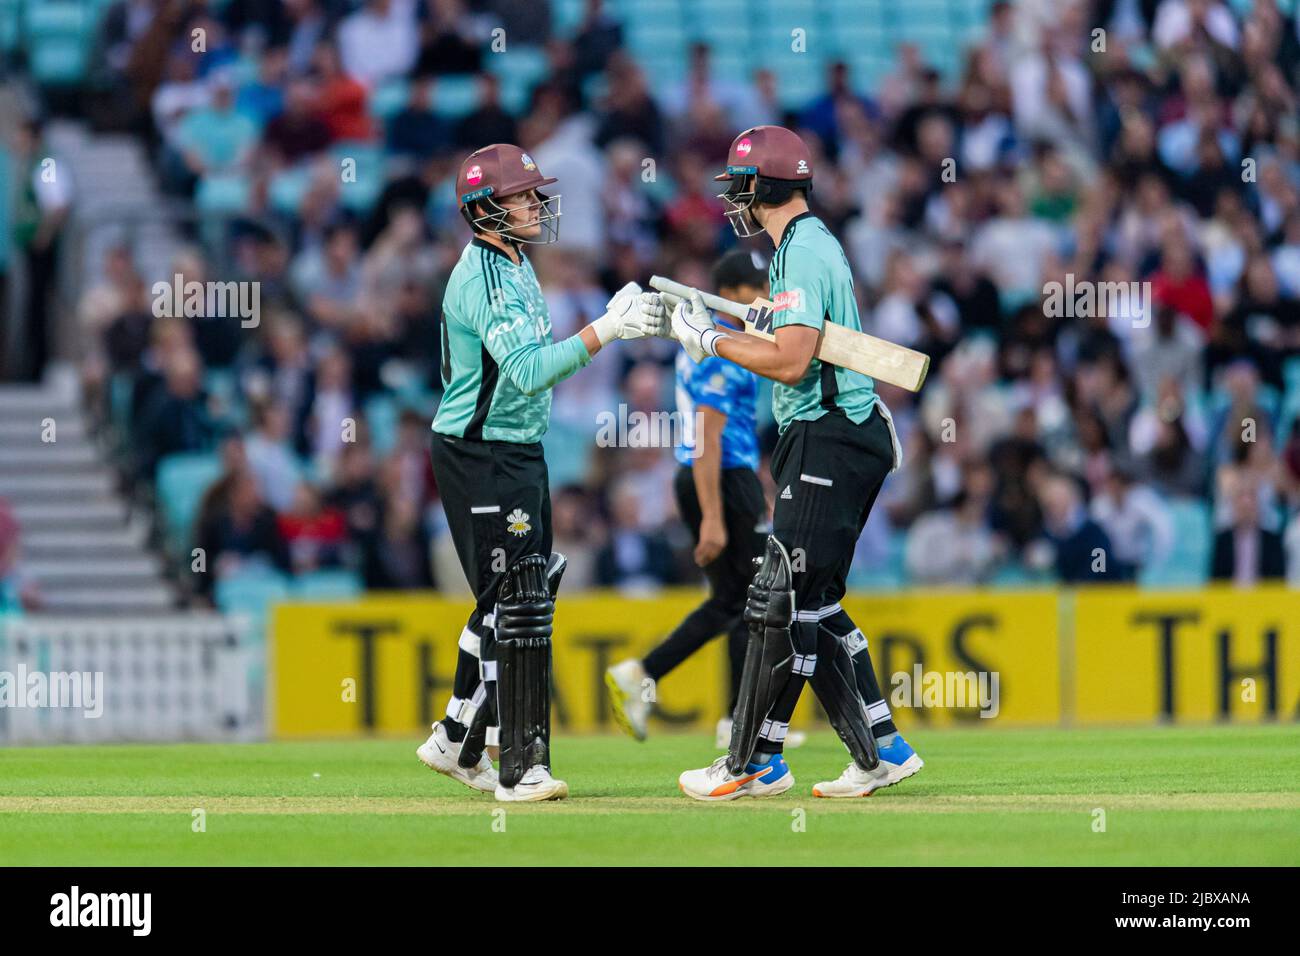 LONDON, UNITED KINGDOM. 08th Jun, 2022. Jason Roy of Surrey Cricket Club (left) and Will Jacks of Surrey Cricket Club (right) during Vitality Blast - Surry vs Sussex Sharks at The Kia Oval Cricket Ground on Wednesday, June 08, 2022 in LONDON ENGLAND.  Credit: Taka G Wu/Alamy Live News Stock Photo